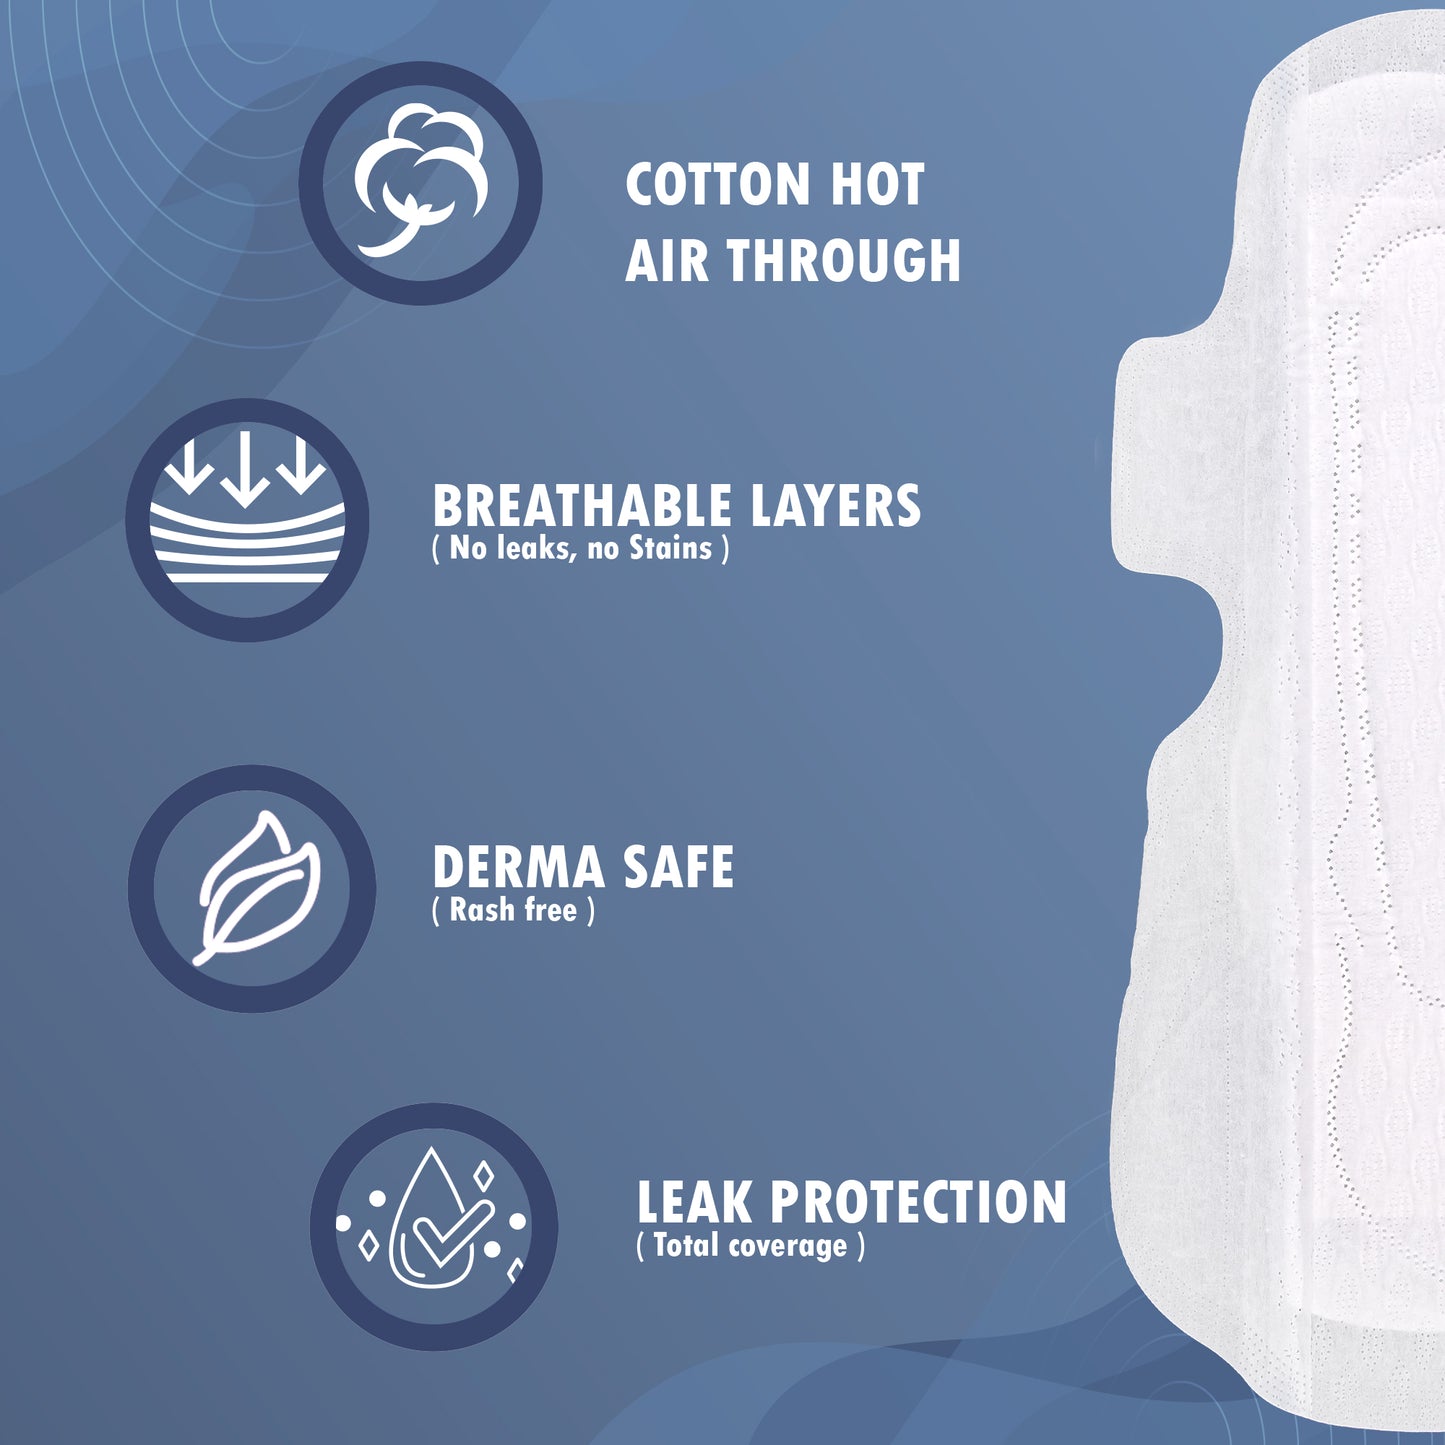 Time Ultra Velvet Sanitary Pads | Odour Free | Cottony Top Sheet | Day and Night Pad | Leak guard